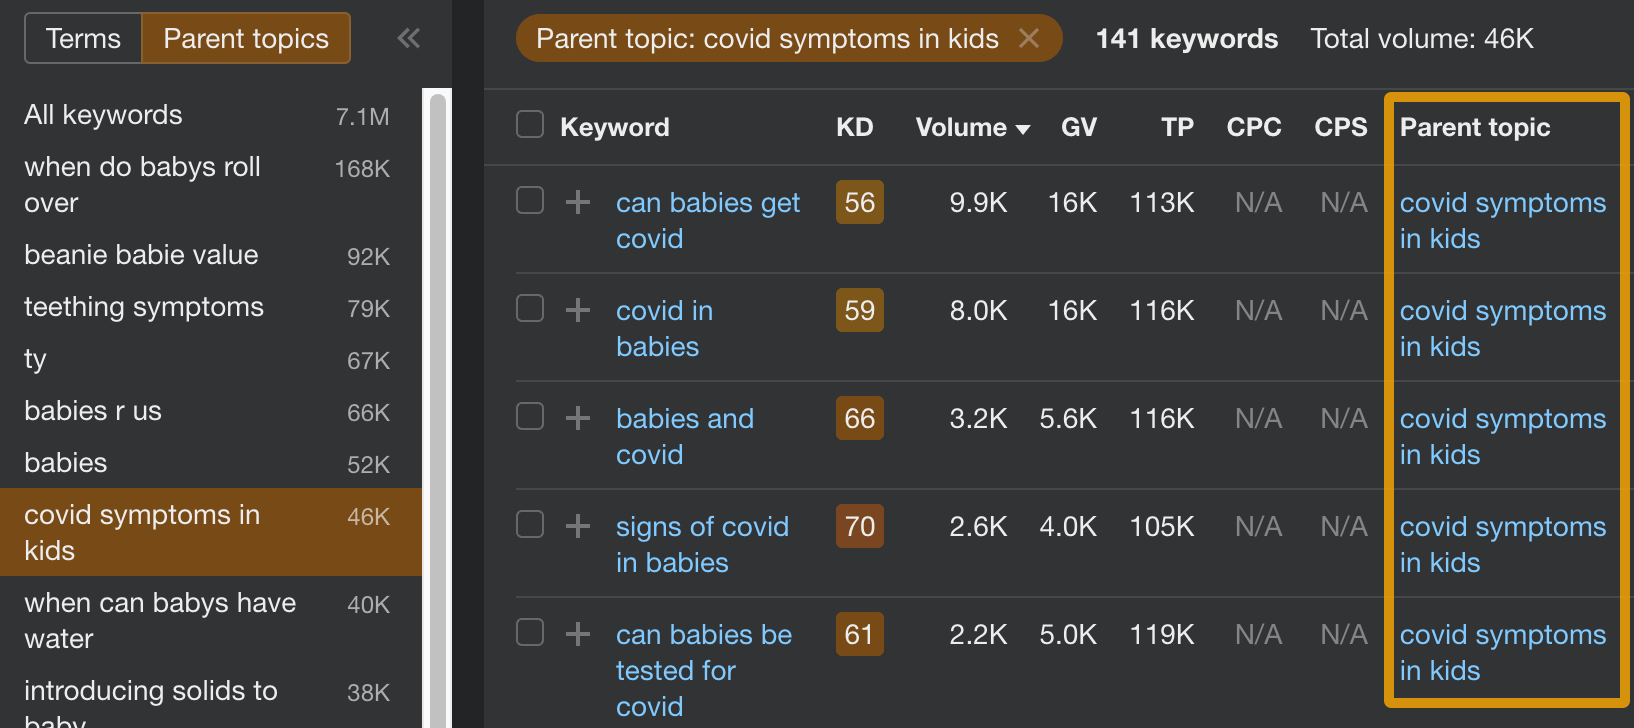 Keywords grouped under the same Parent Topic